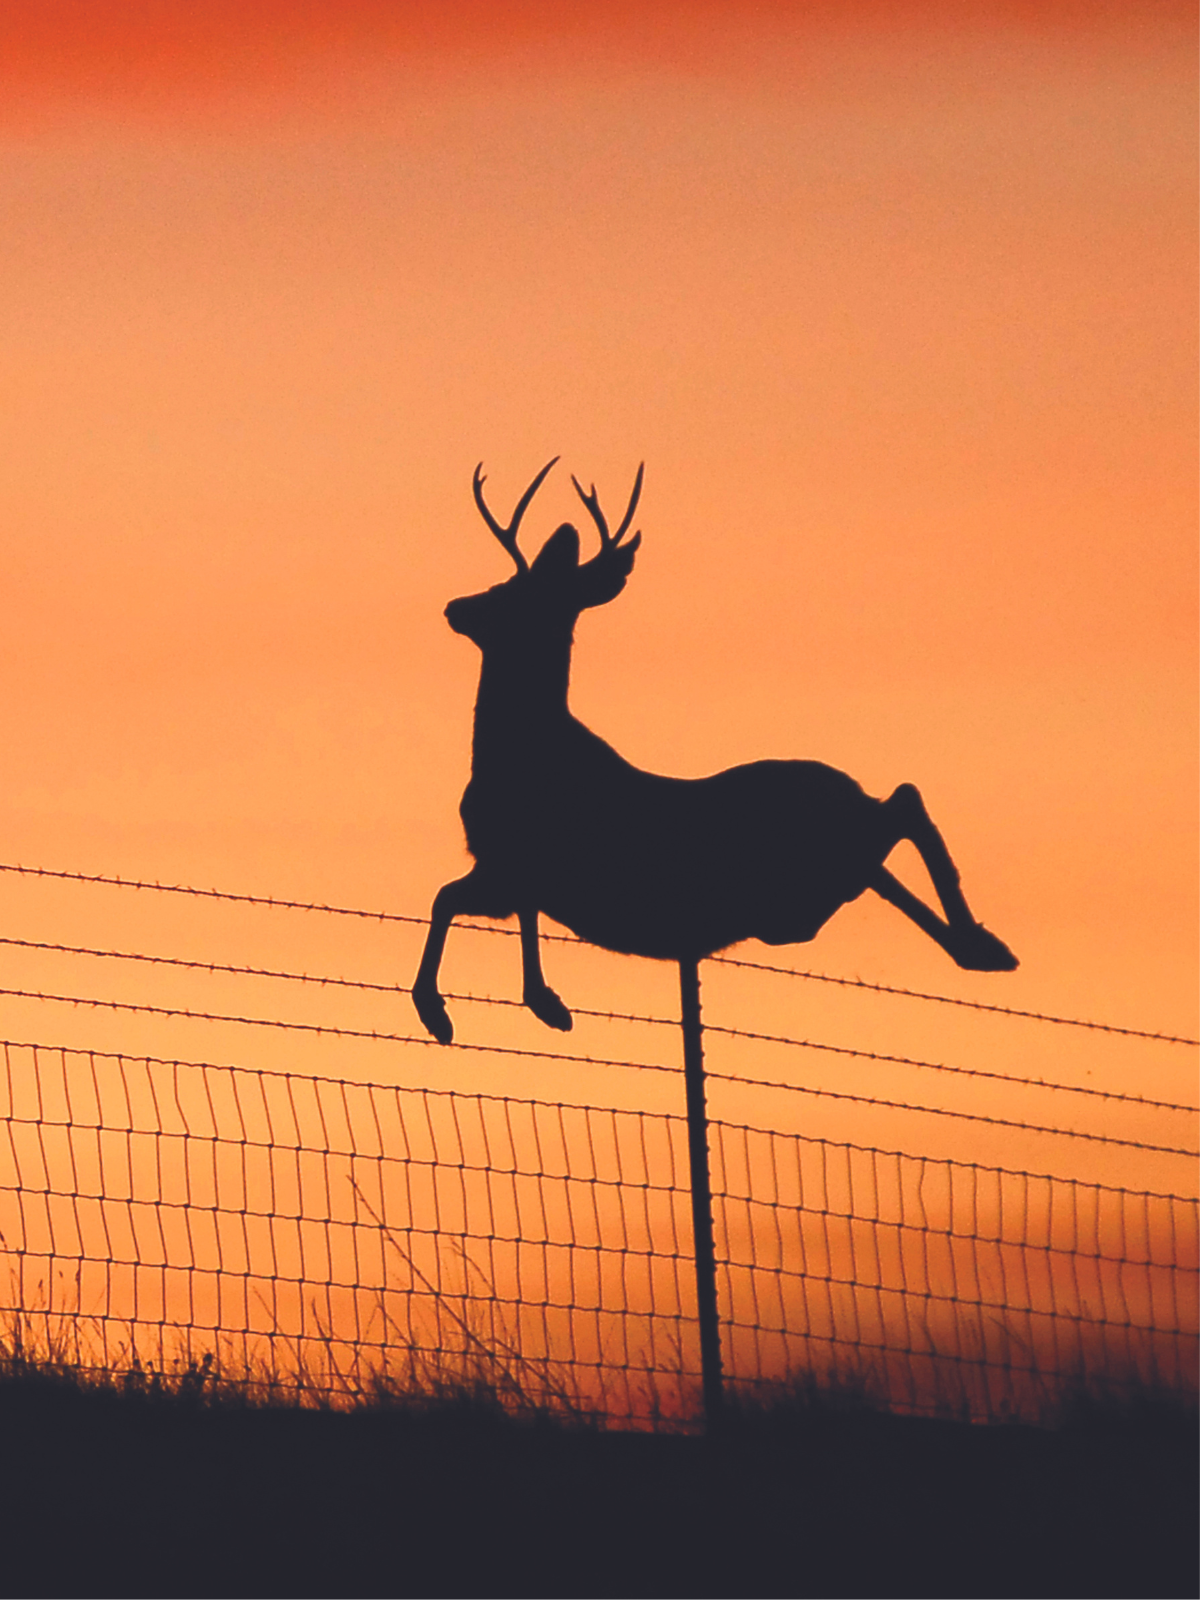 A silhouette of a mule deer jumping a fence against a bright orange sky at sunset.